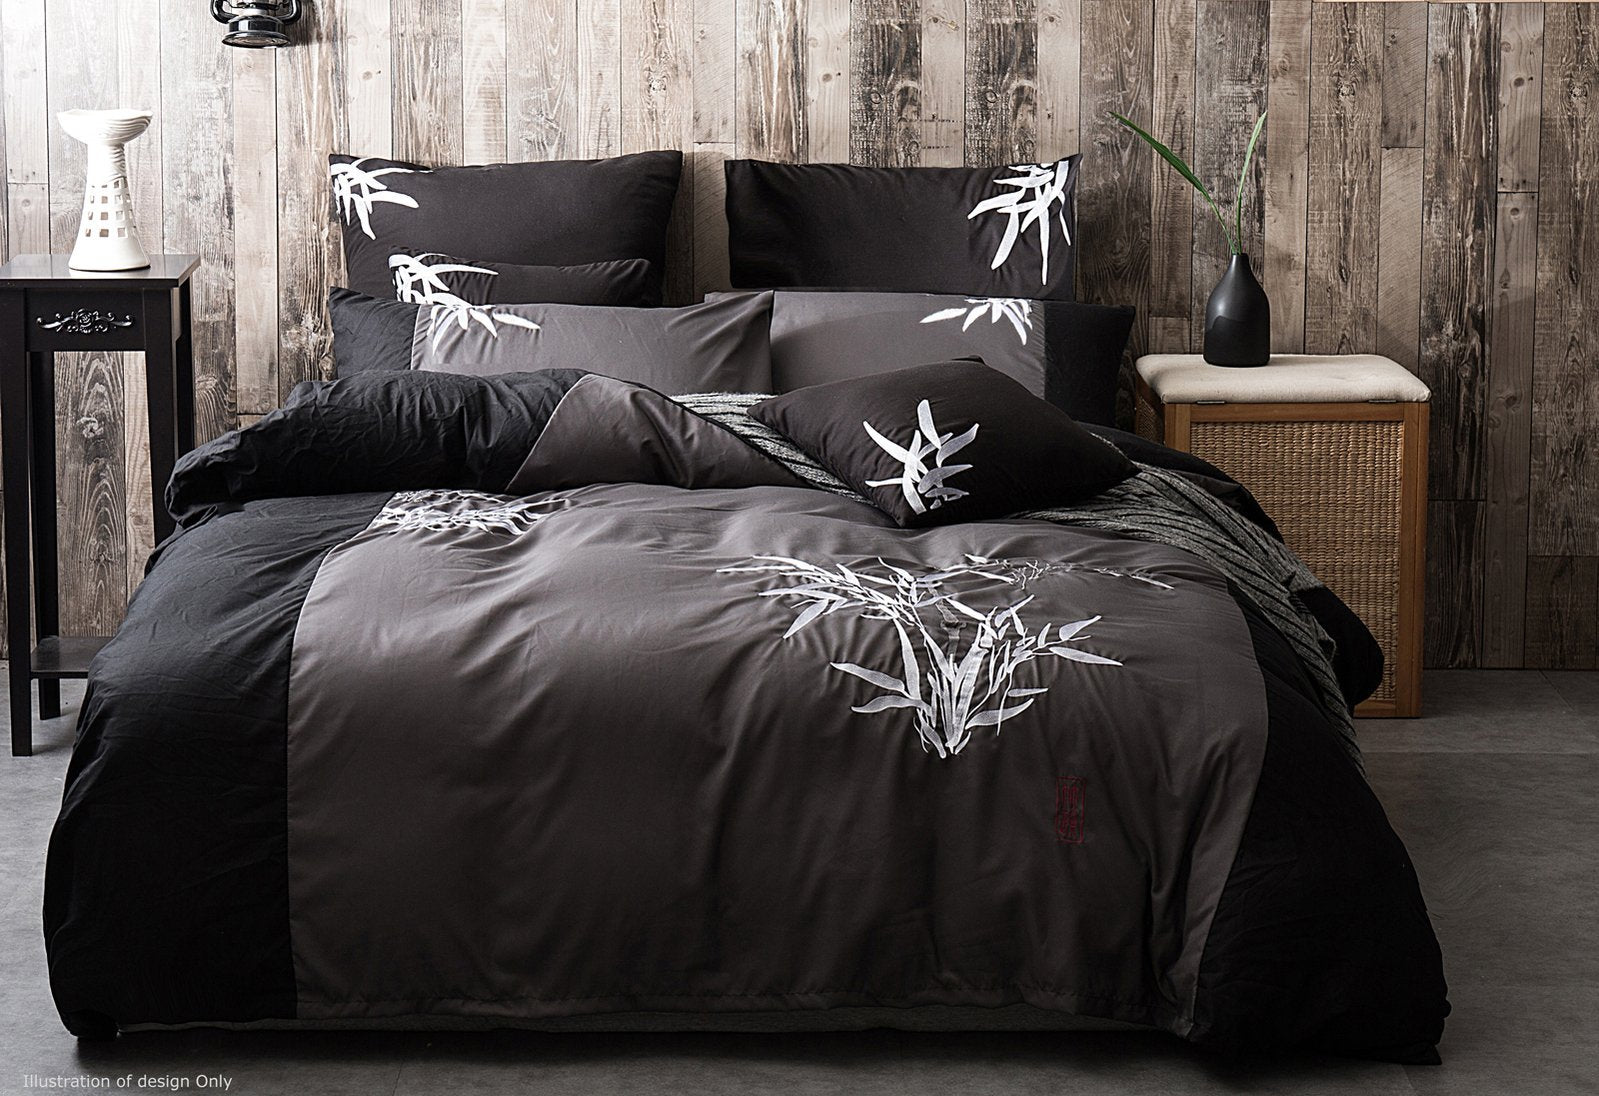 Super King Size Embroidered Bamboo Pattern Black Grey Quilt Cover Set (3PCS)